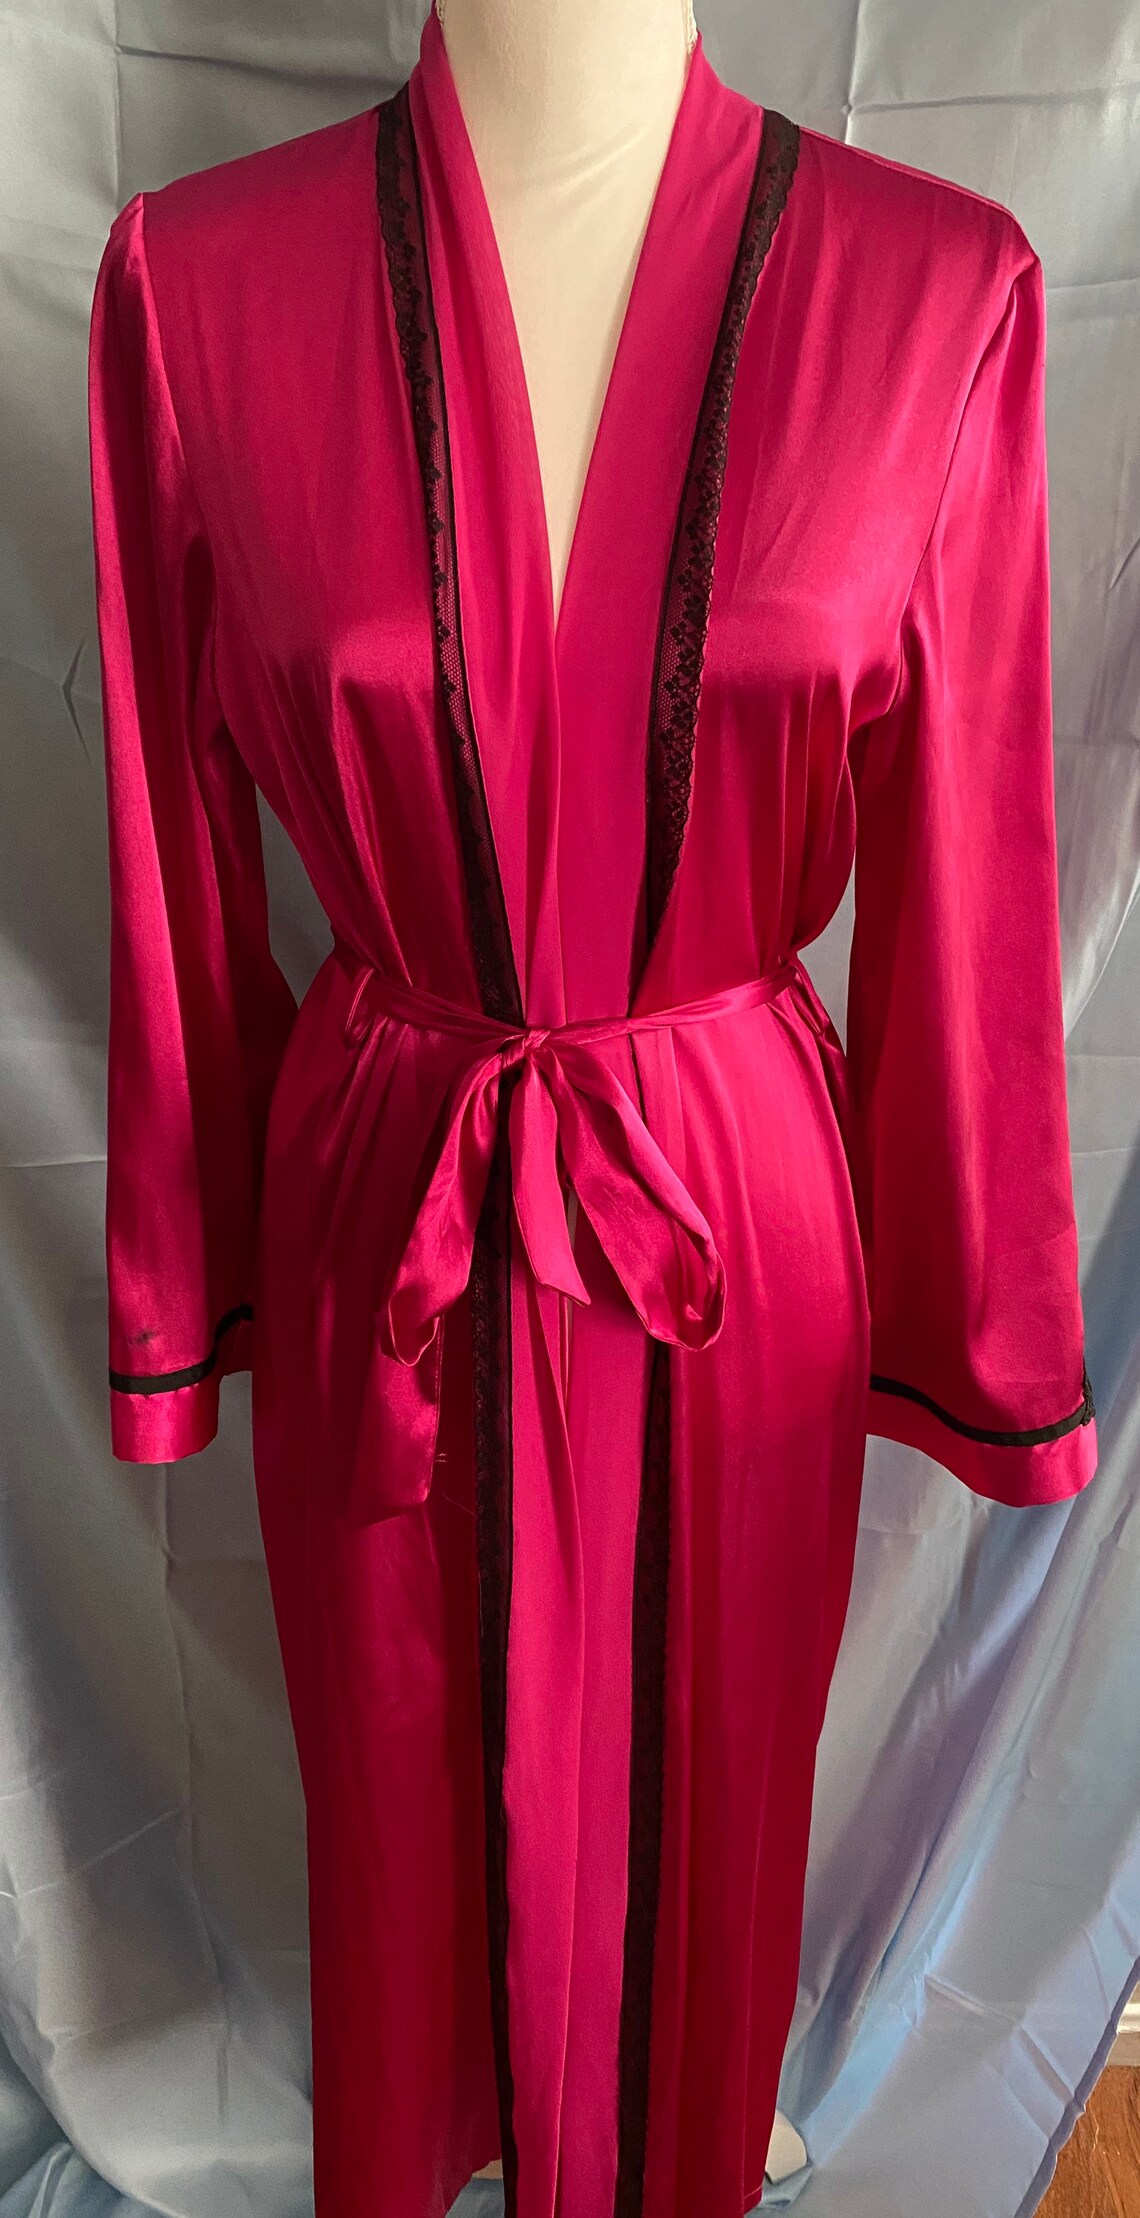 90s Magenta Floor Length Sleek Robe with Black Lace Accents | Etsy